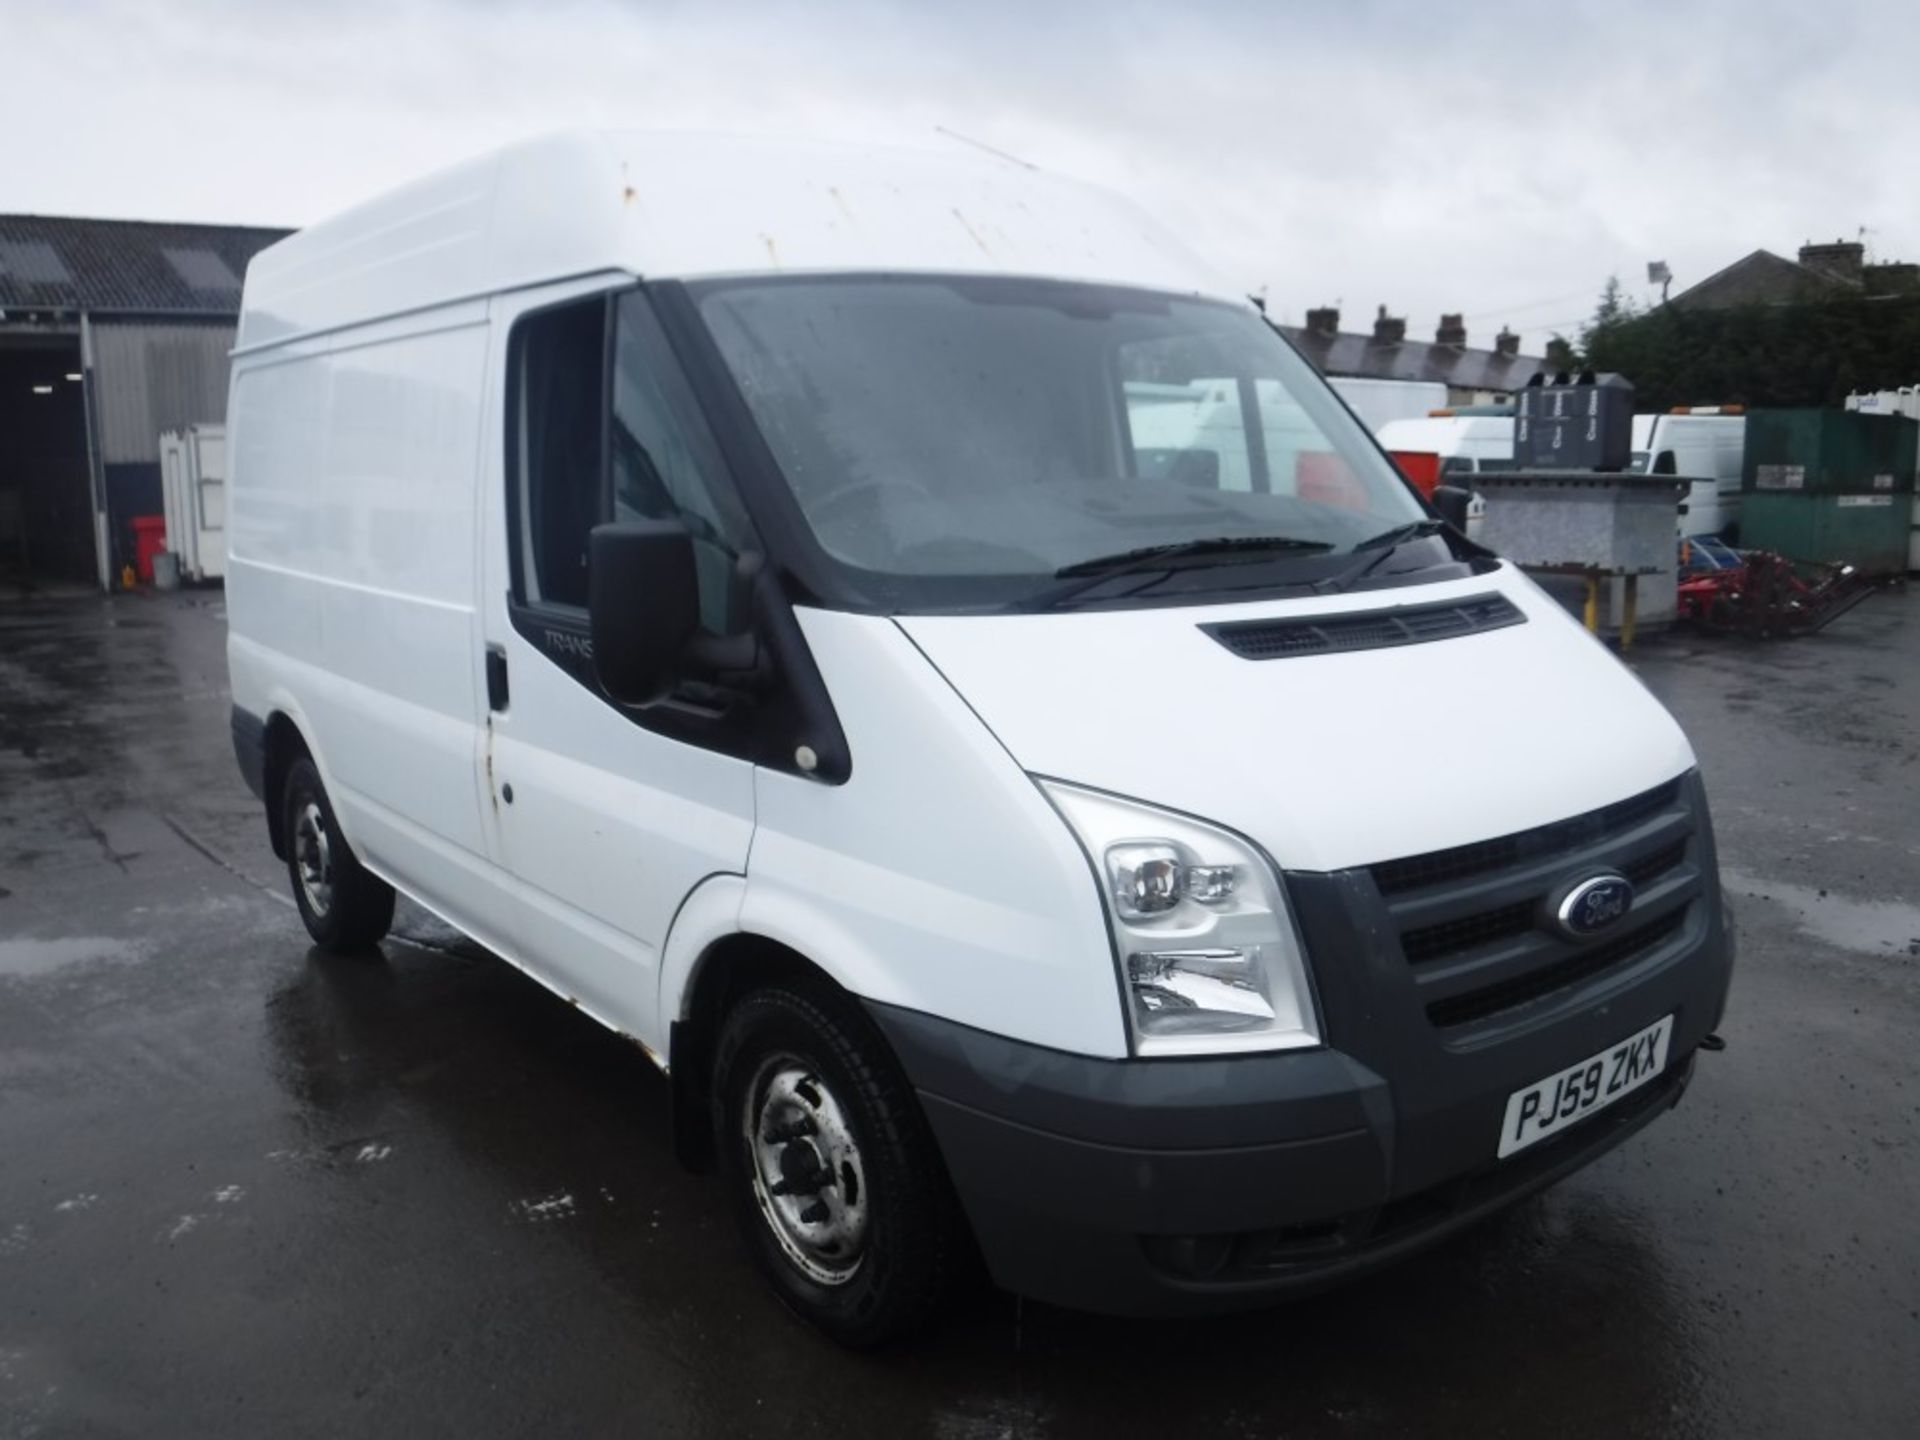 59 reg FORD TRANSIT T280S FWD VAN (DIRECT COUNCIL) 1ST REG 01/10, 78436M, V5 HERE, 1 OWNER FROM